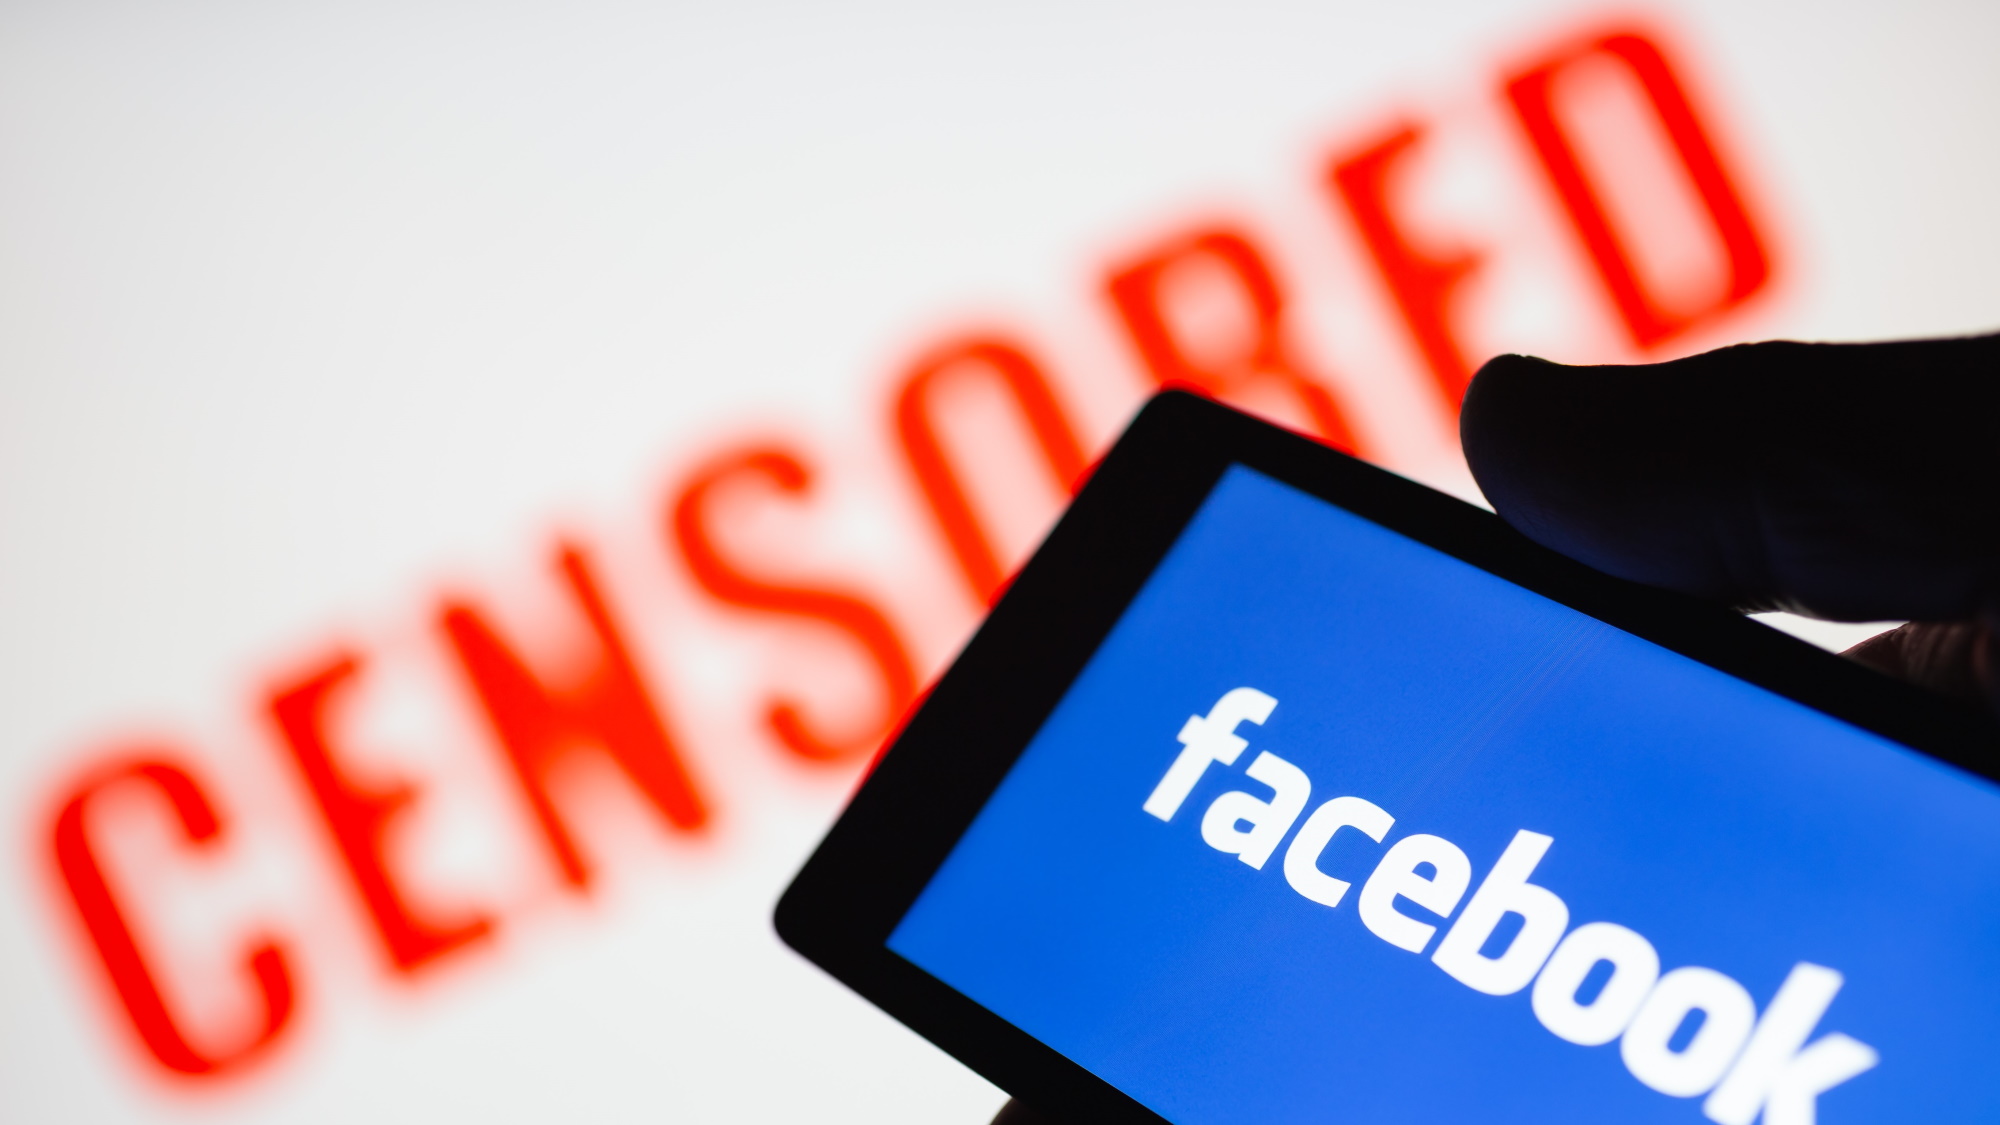 Smartphone in hand displaying the logo of the Facebook. Red censored text blurred on background